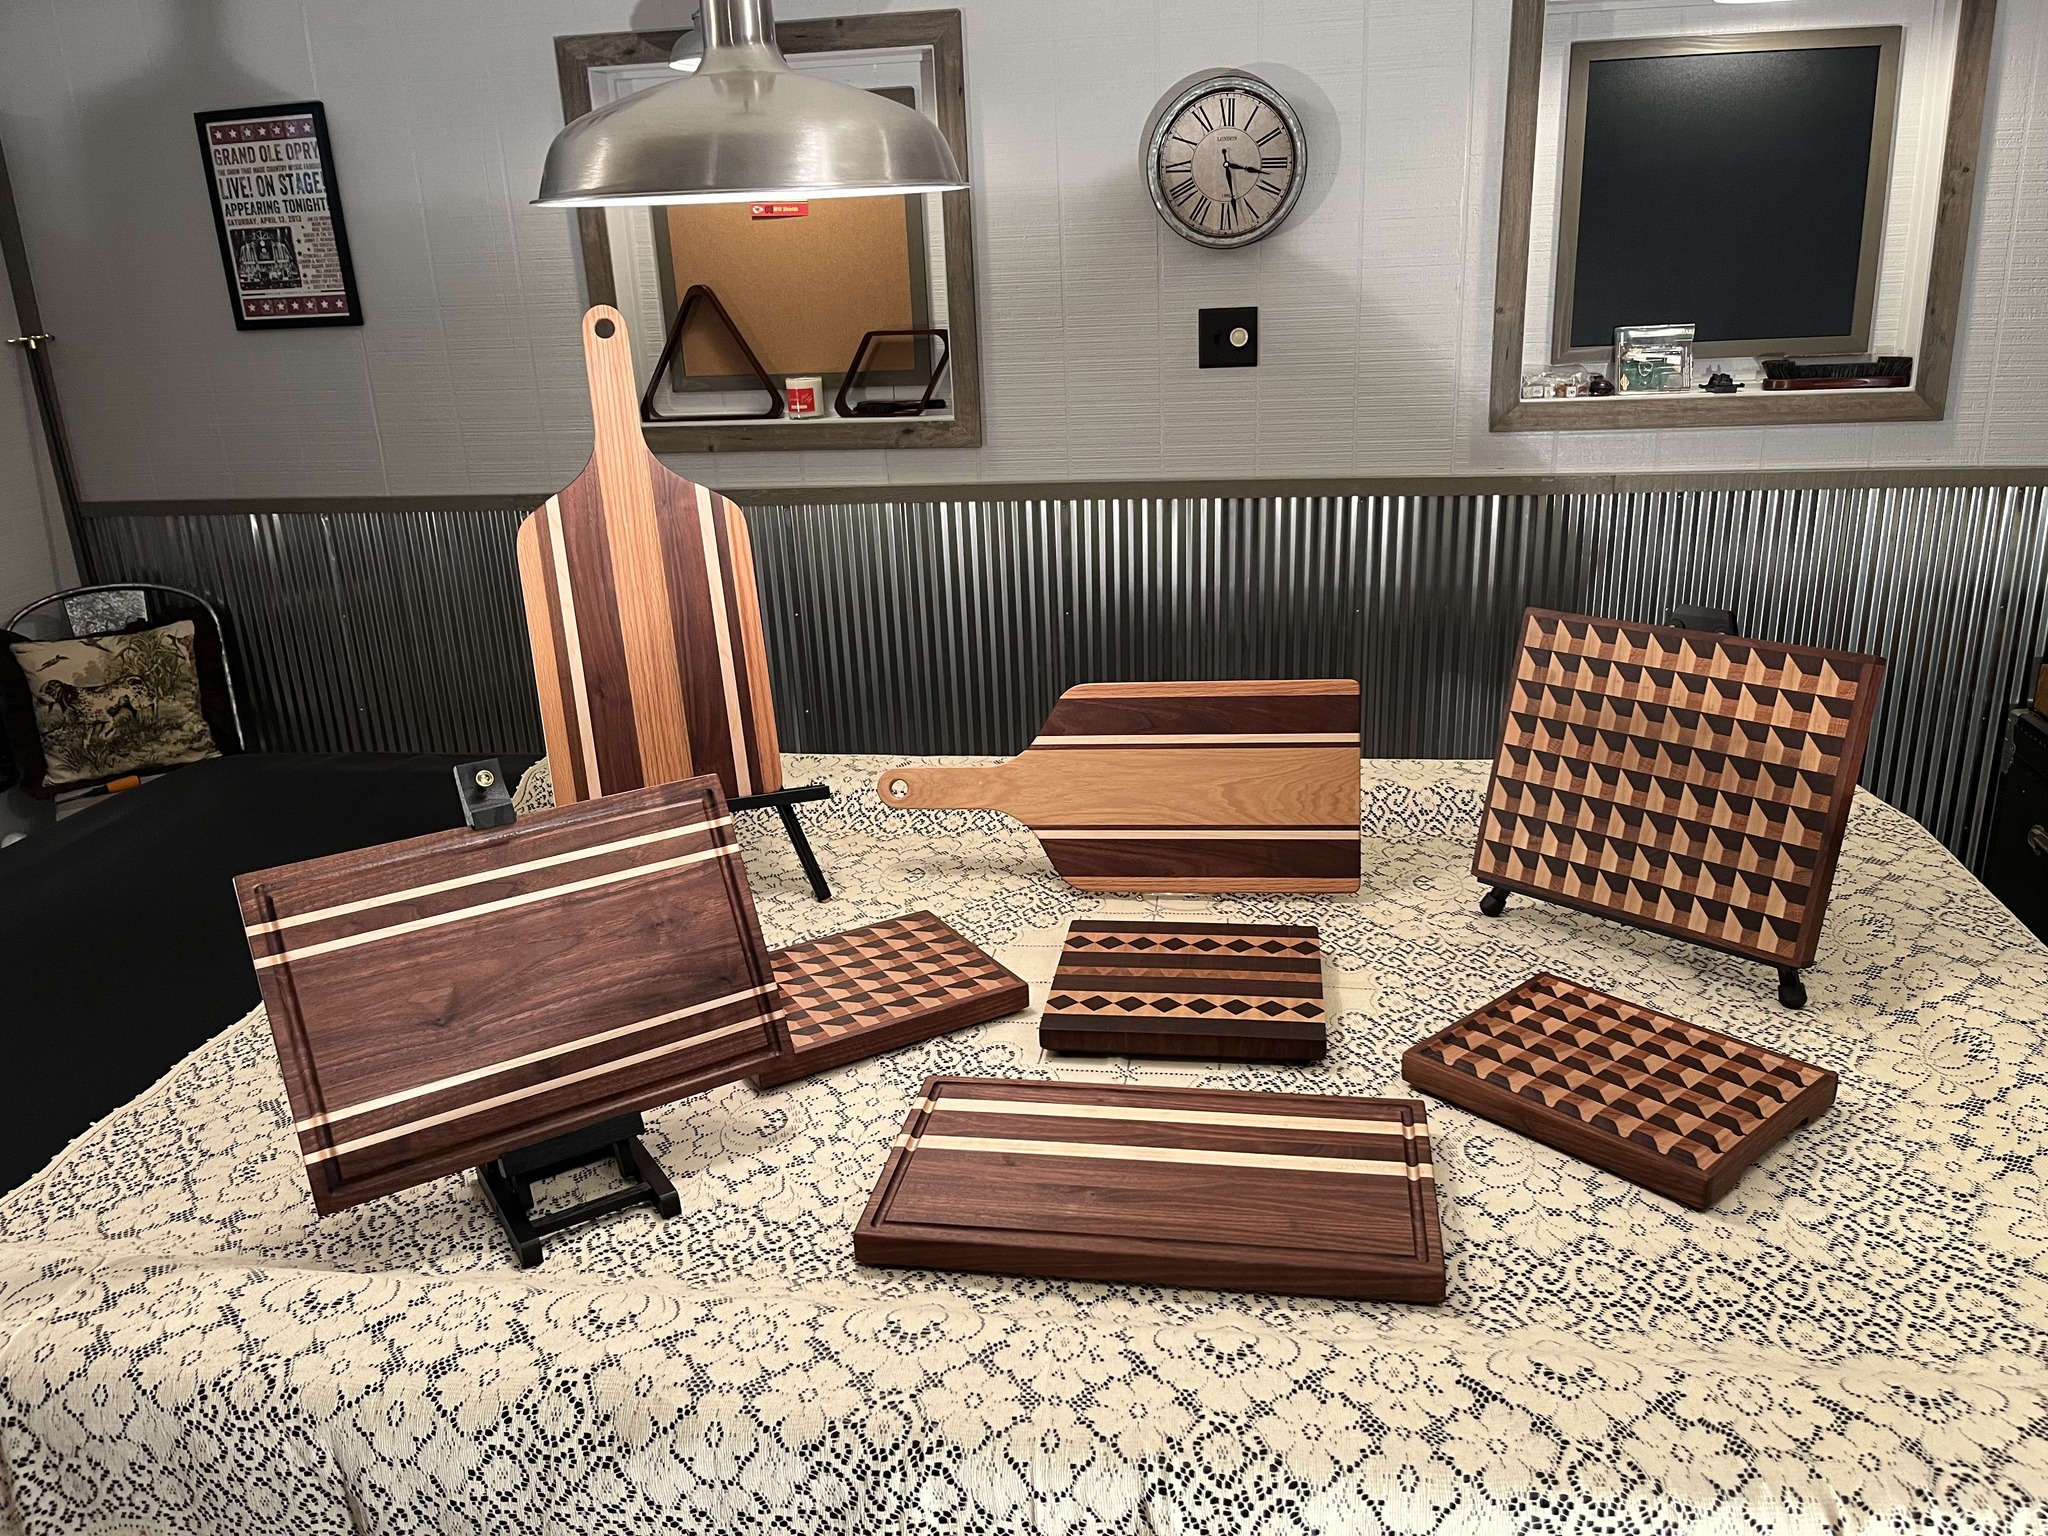 handcrafted wood items including cutting boards displayed on a table